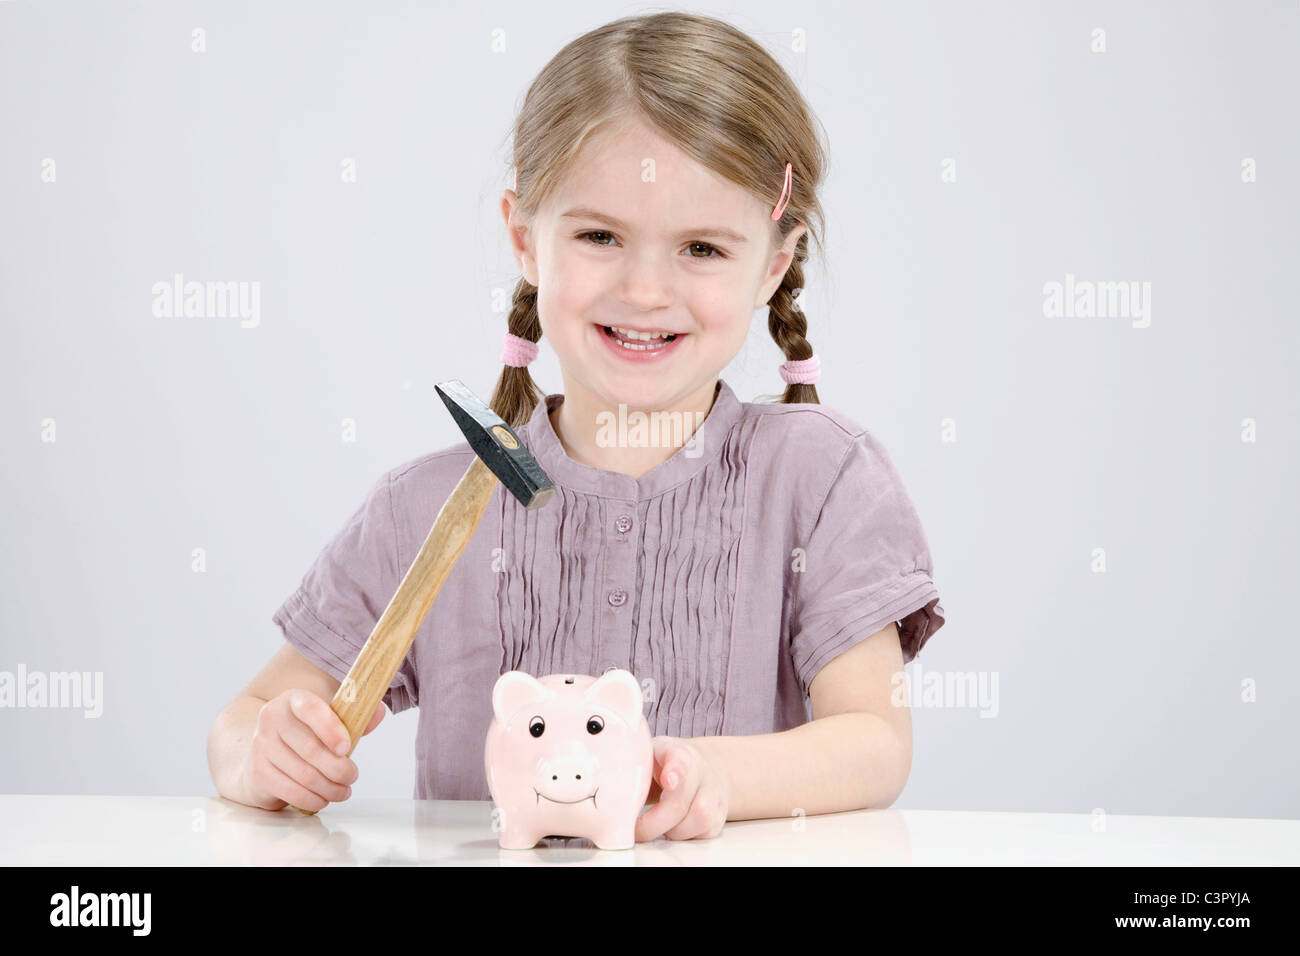 Girl (4-5) with a hammer is about to break a piggybank Stock Photo